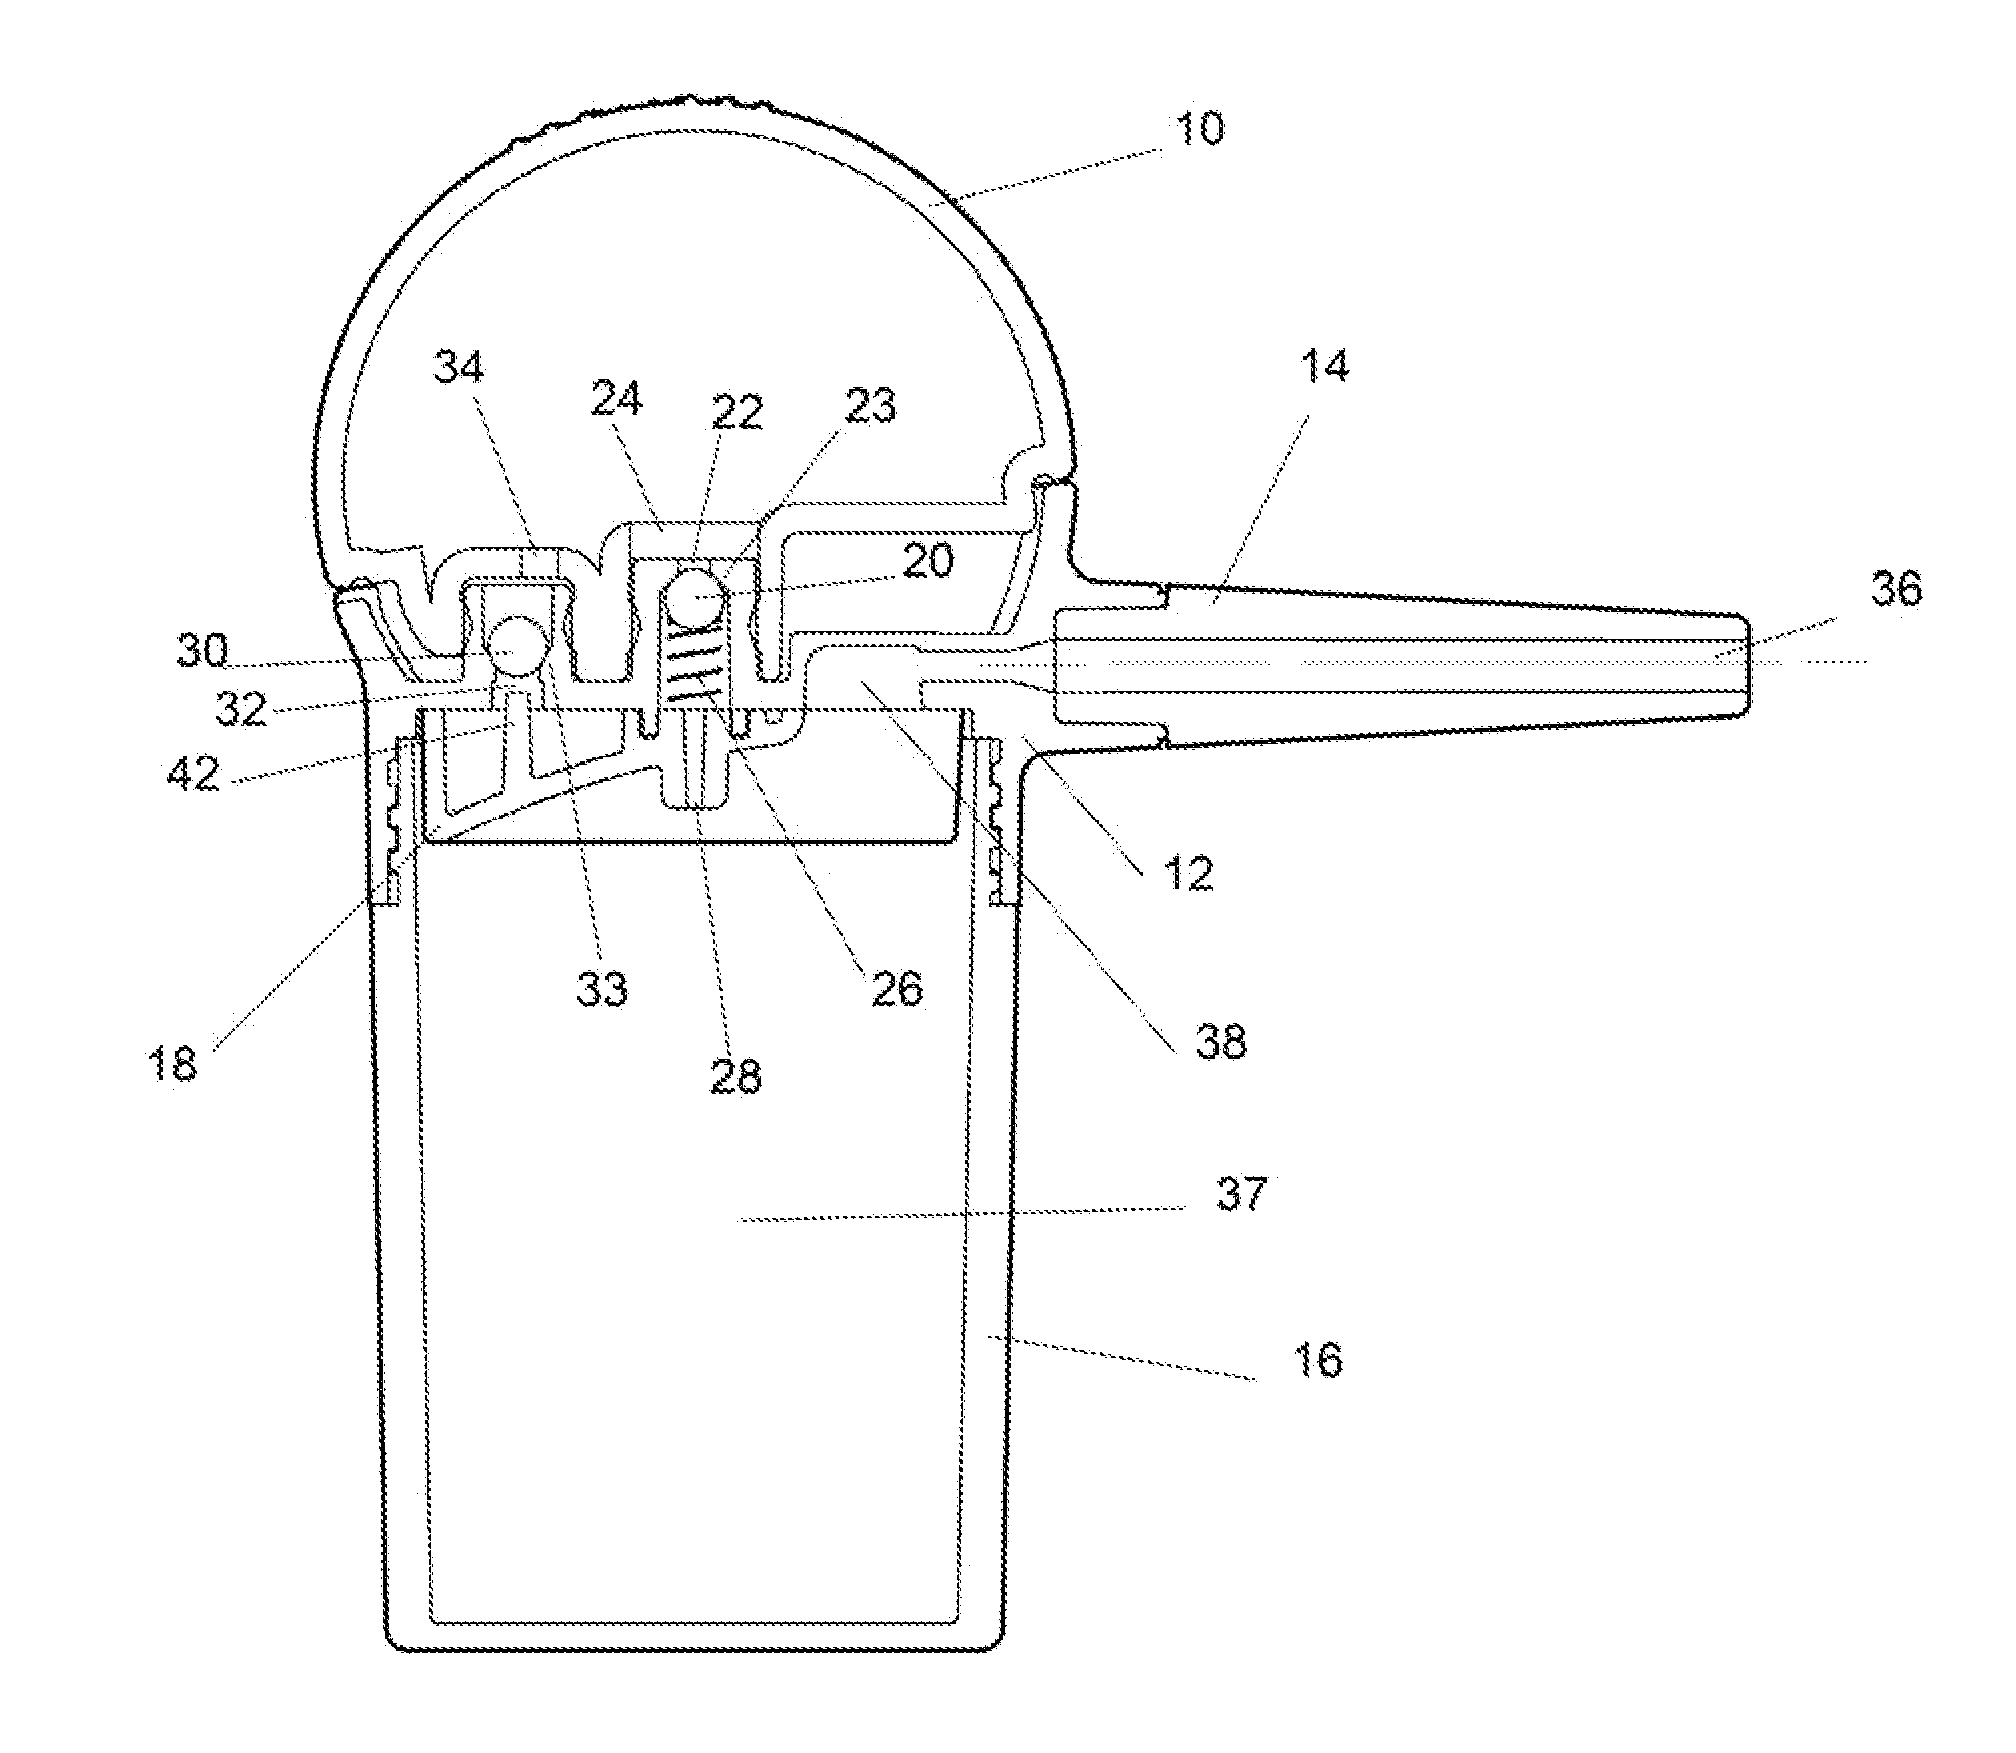 Hair building solids dispenser for one handed operation